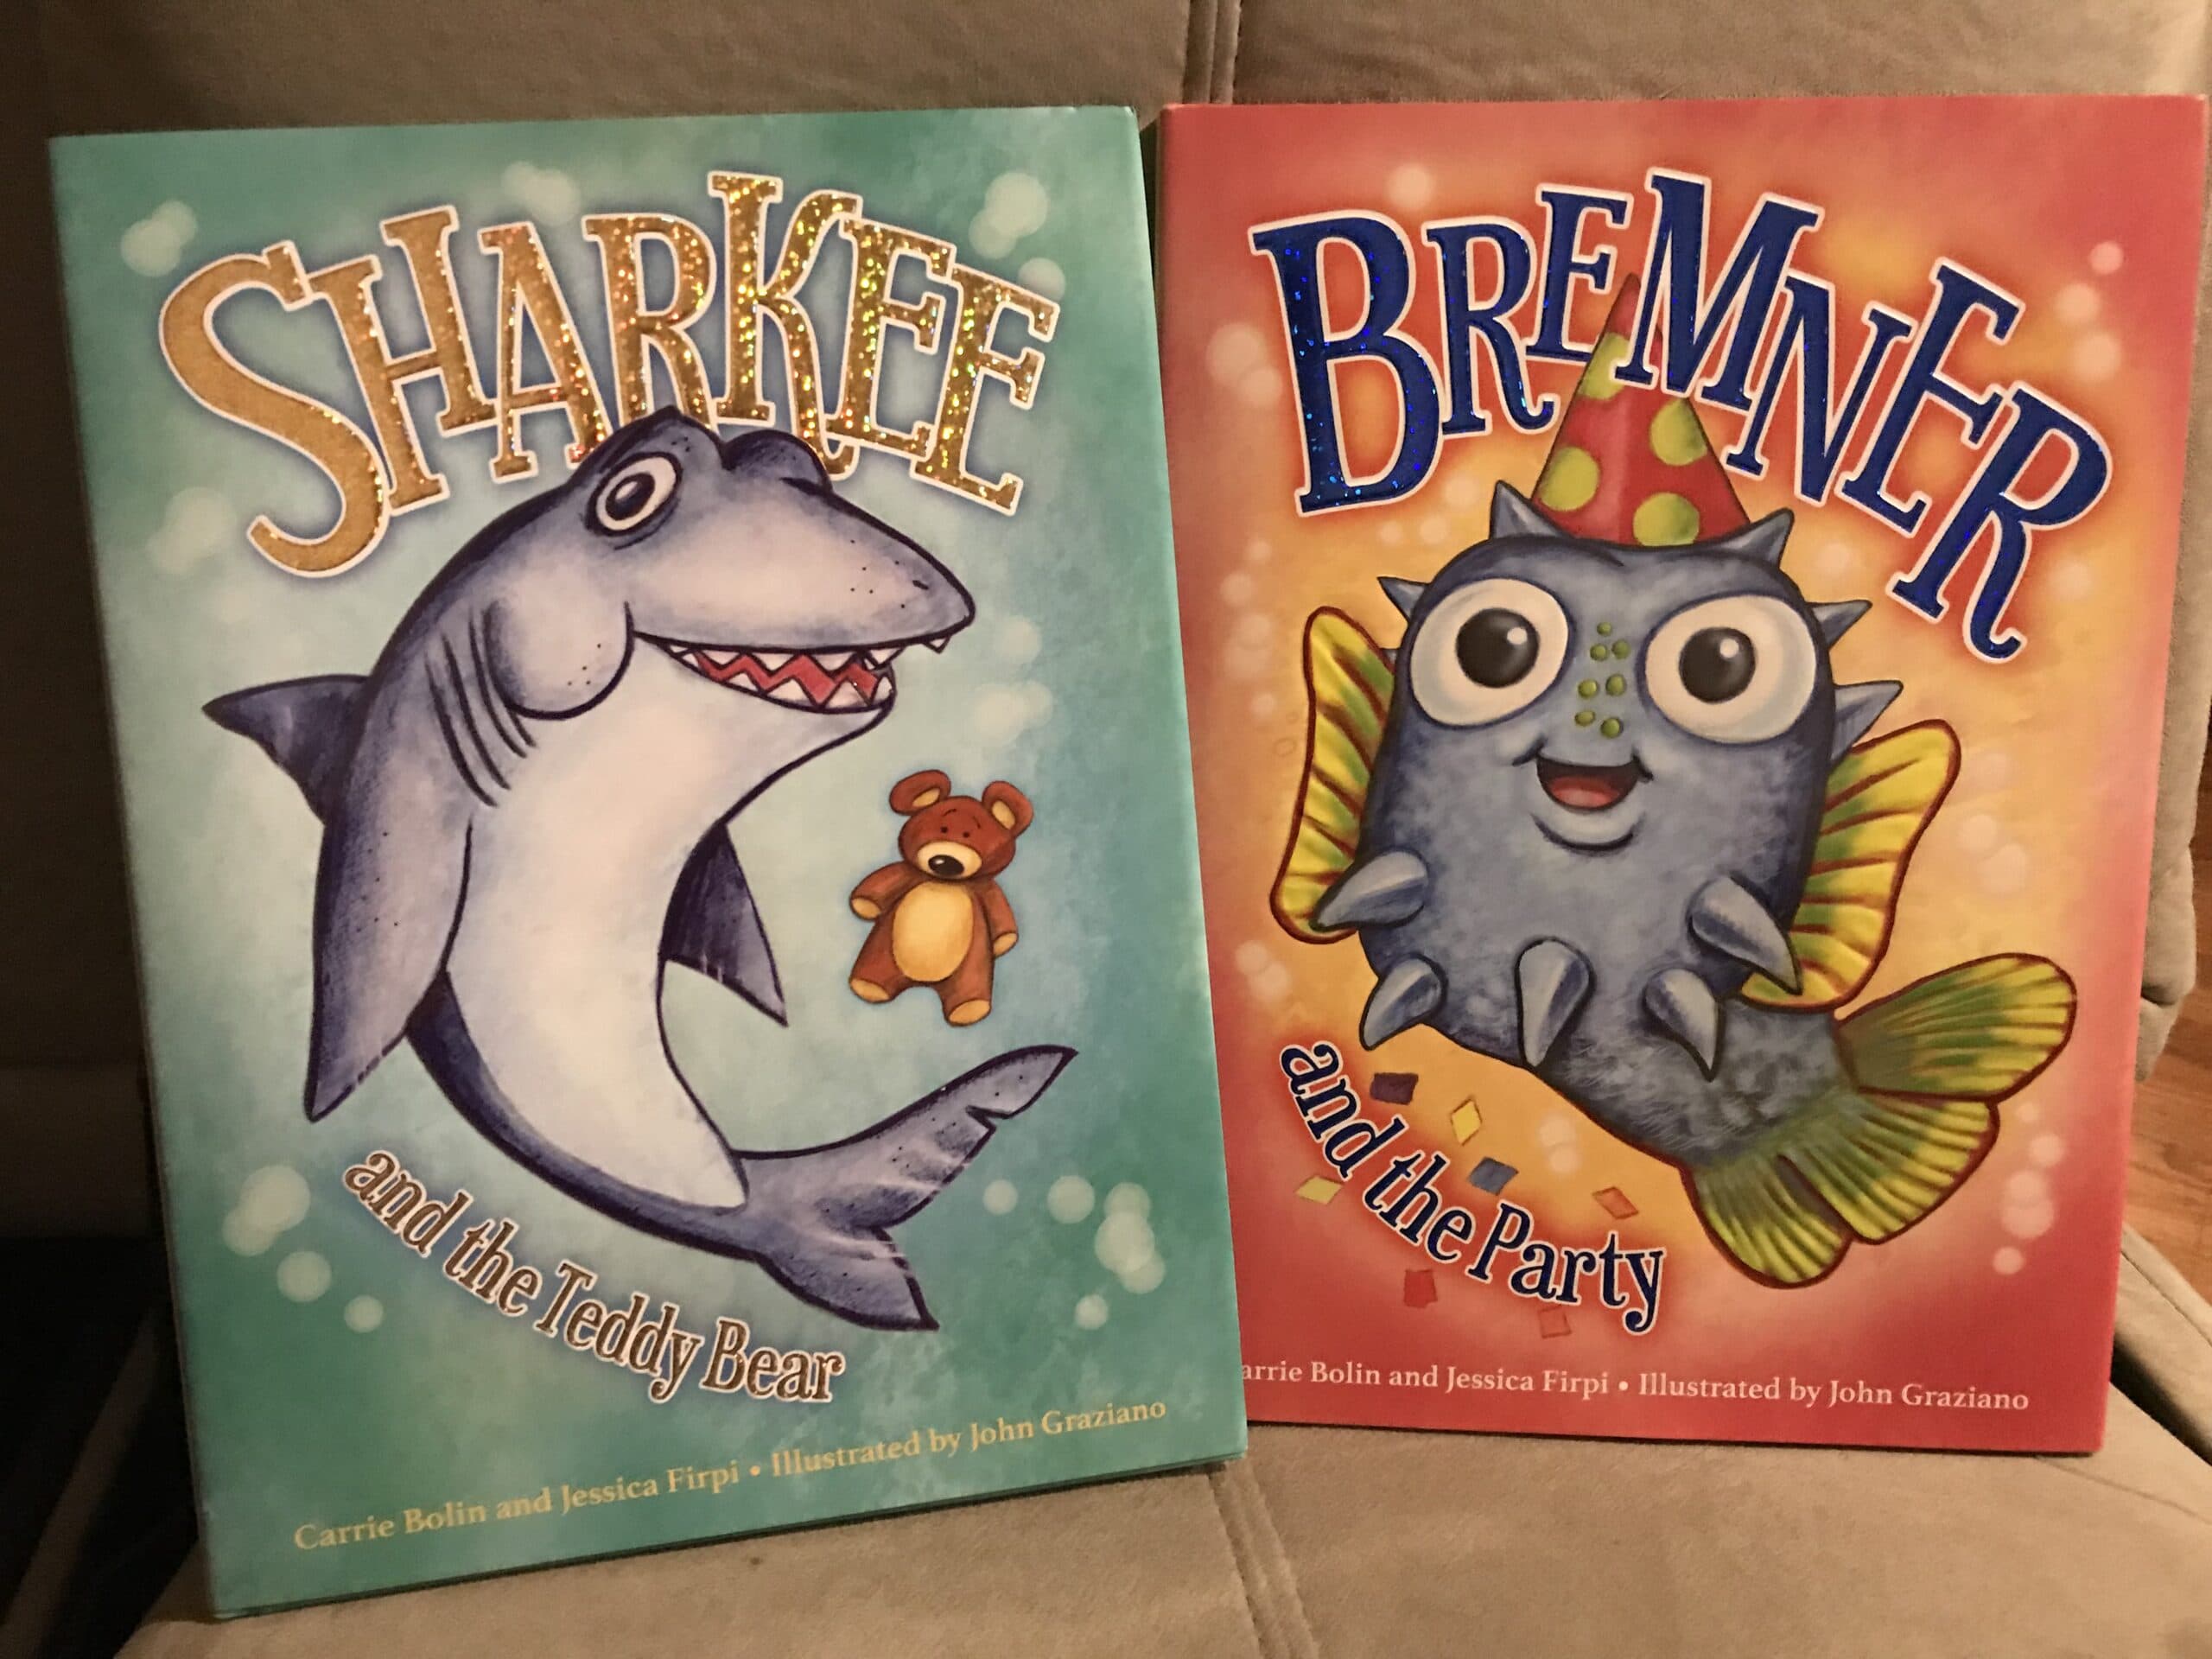 Bremner & the Party and Sharkee & the Teddy Bear Books